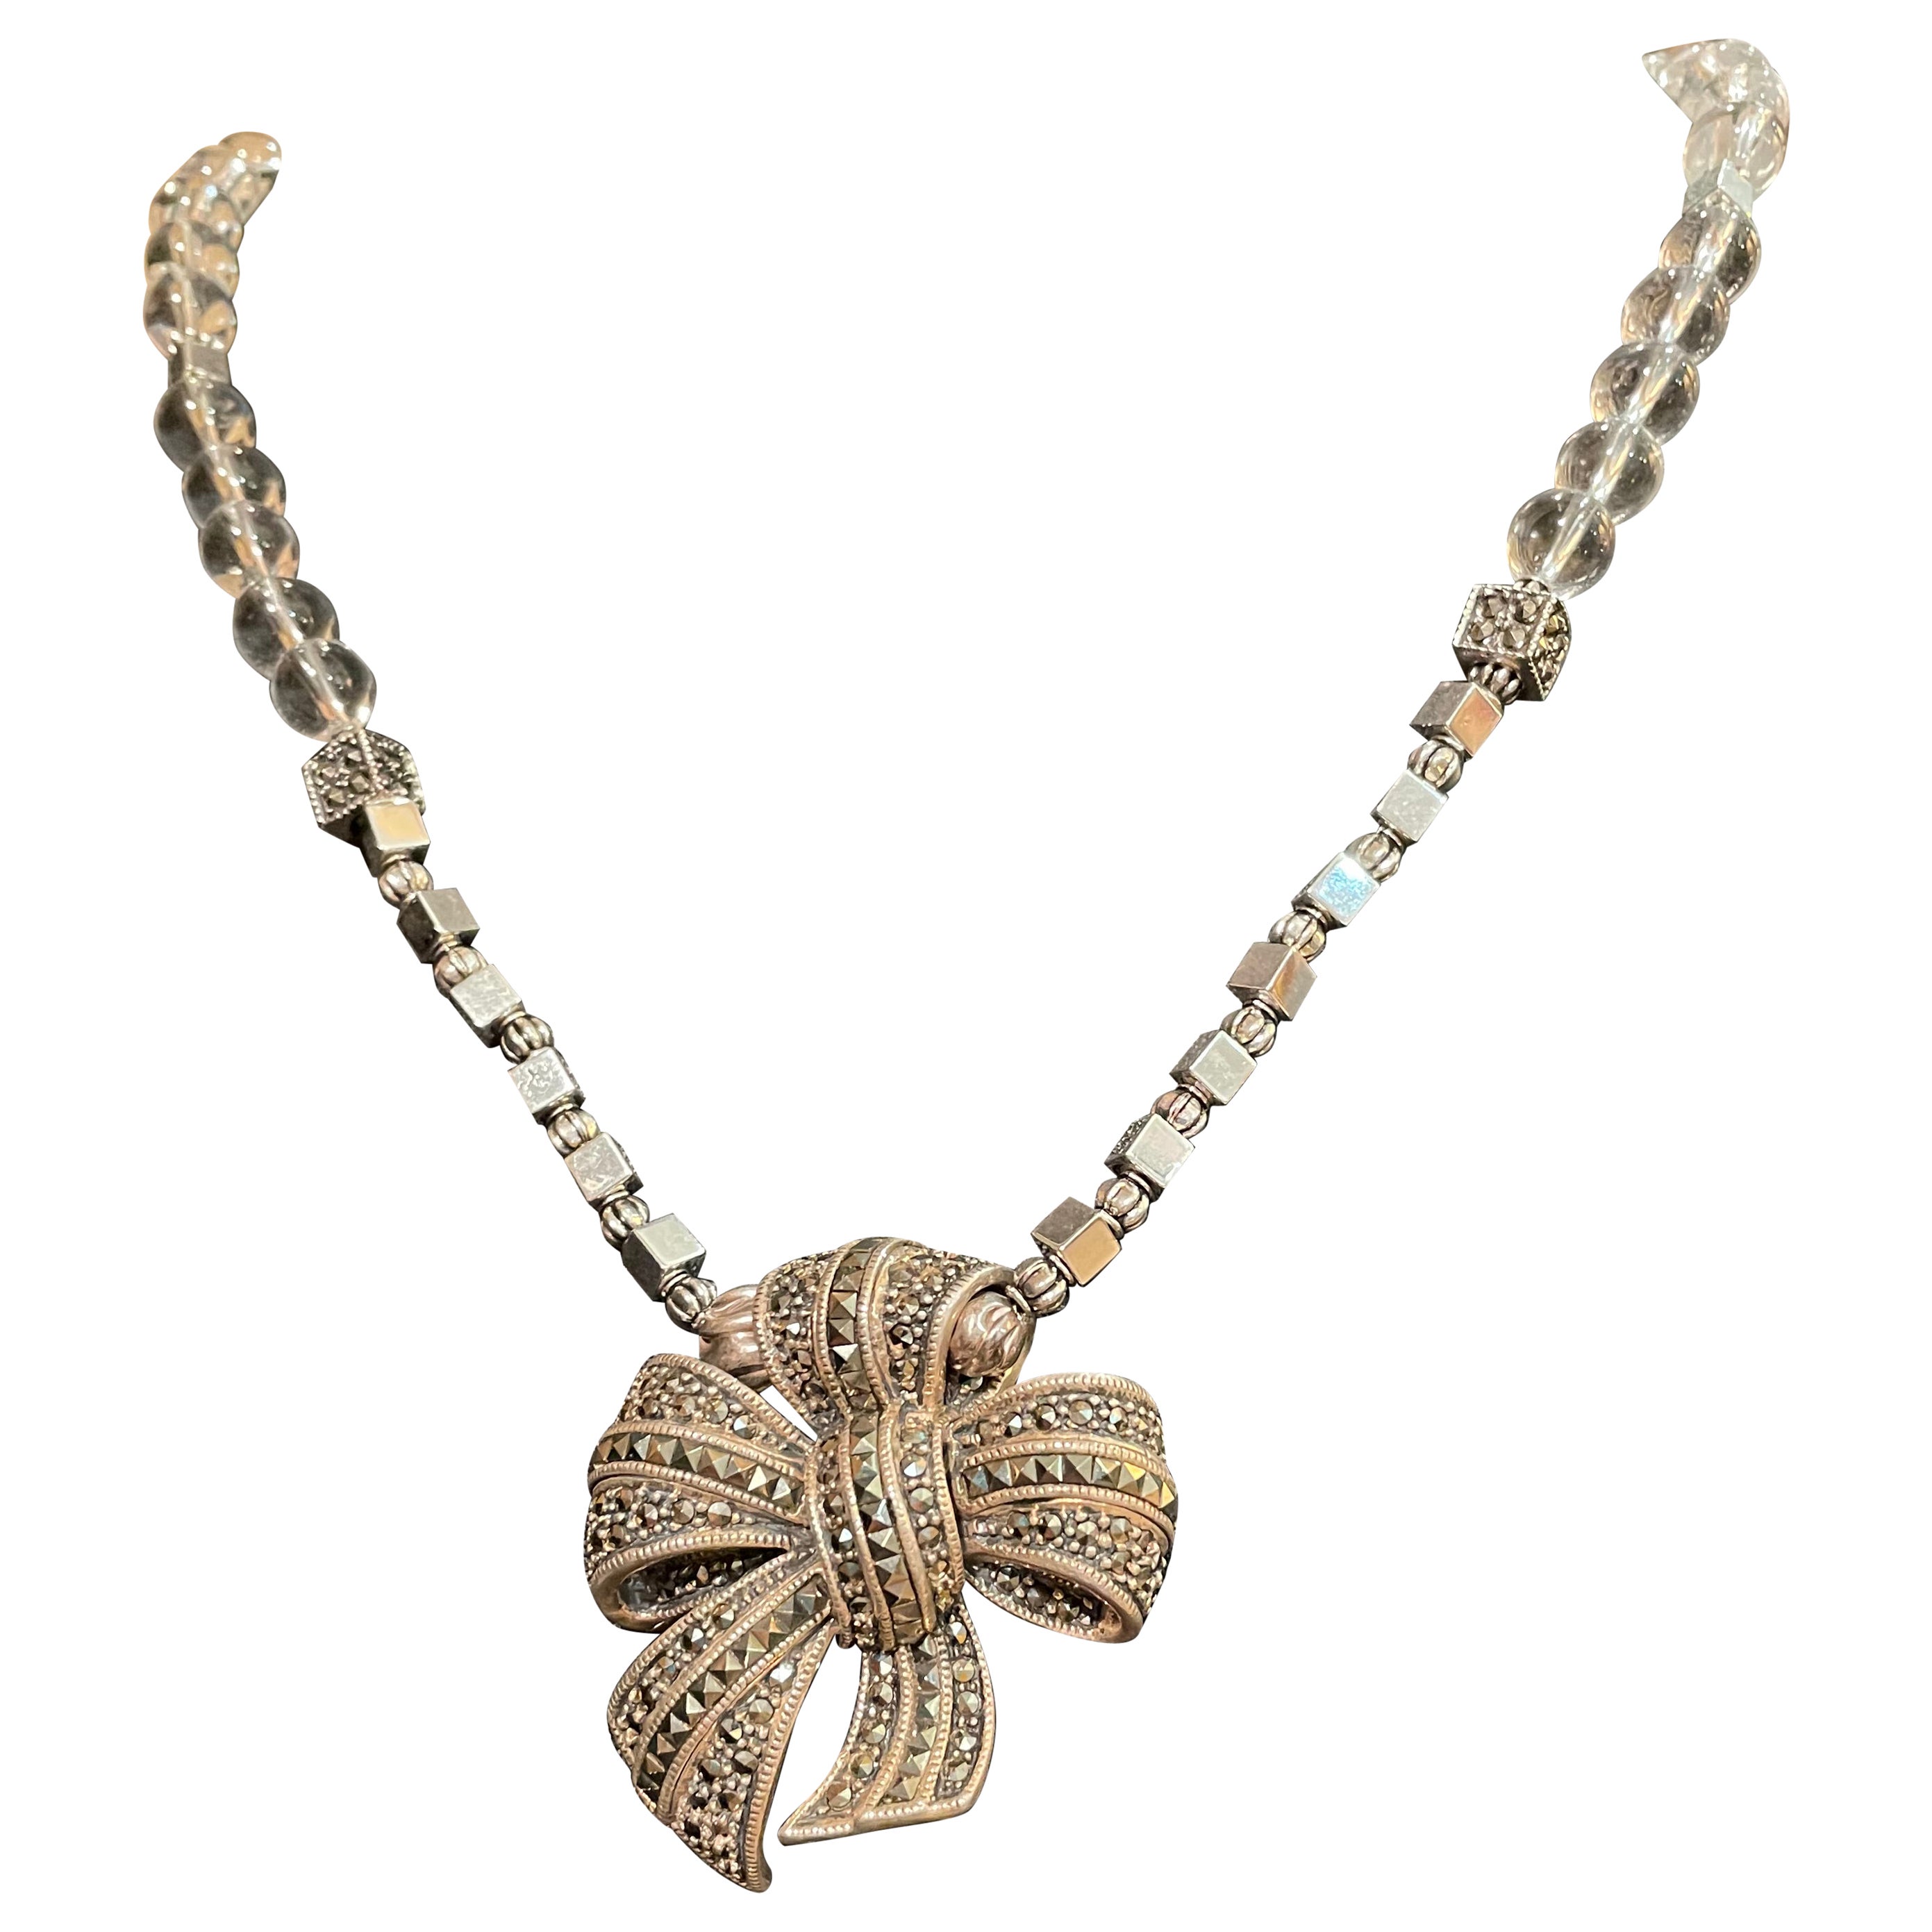 LB offers Sterling Marcasite Judith Jack Brooch Pyrite Rock Crystal necklace For Sale